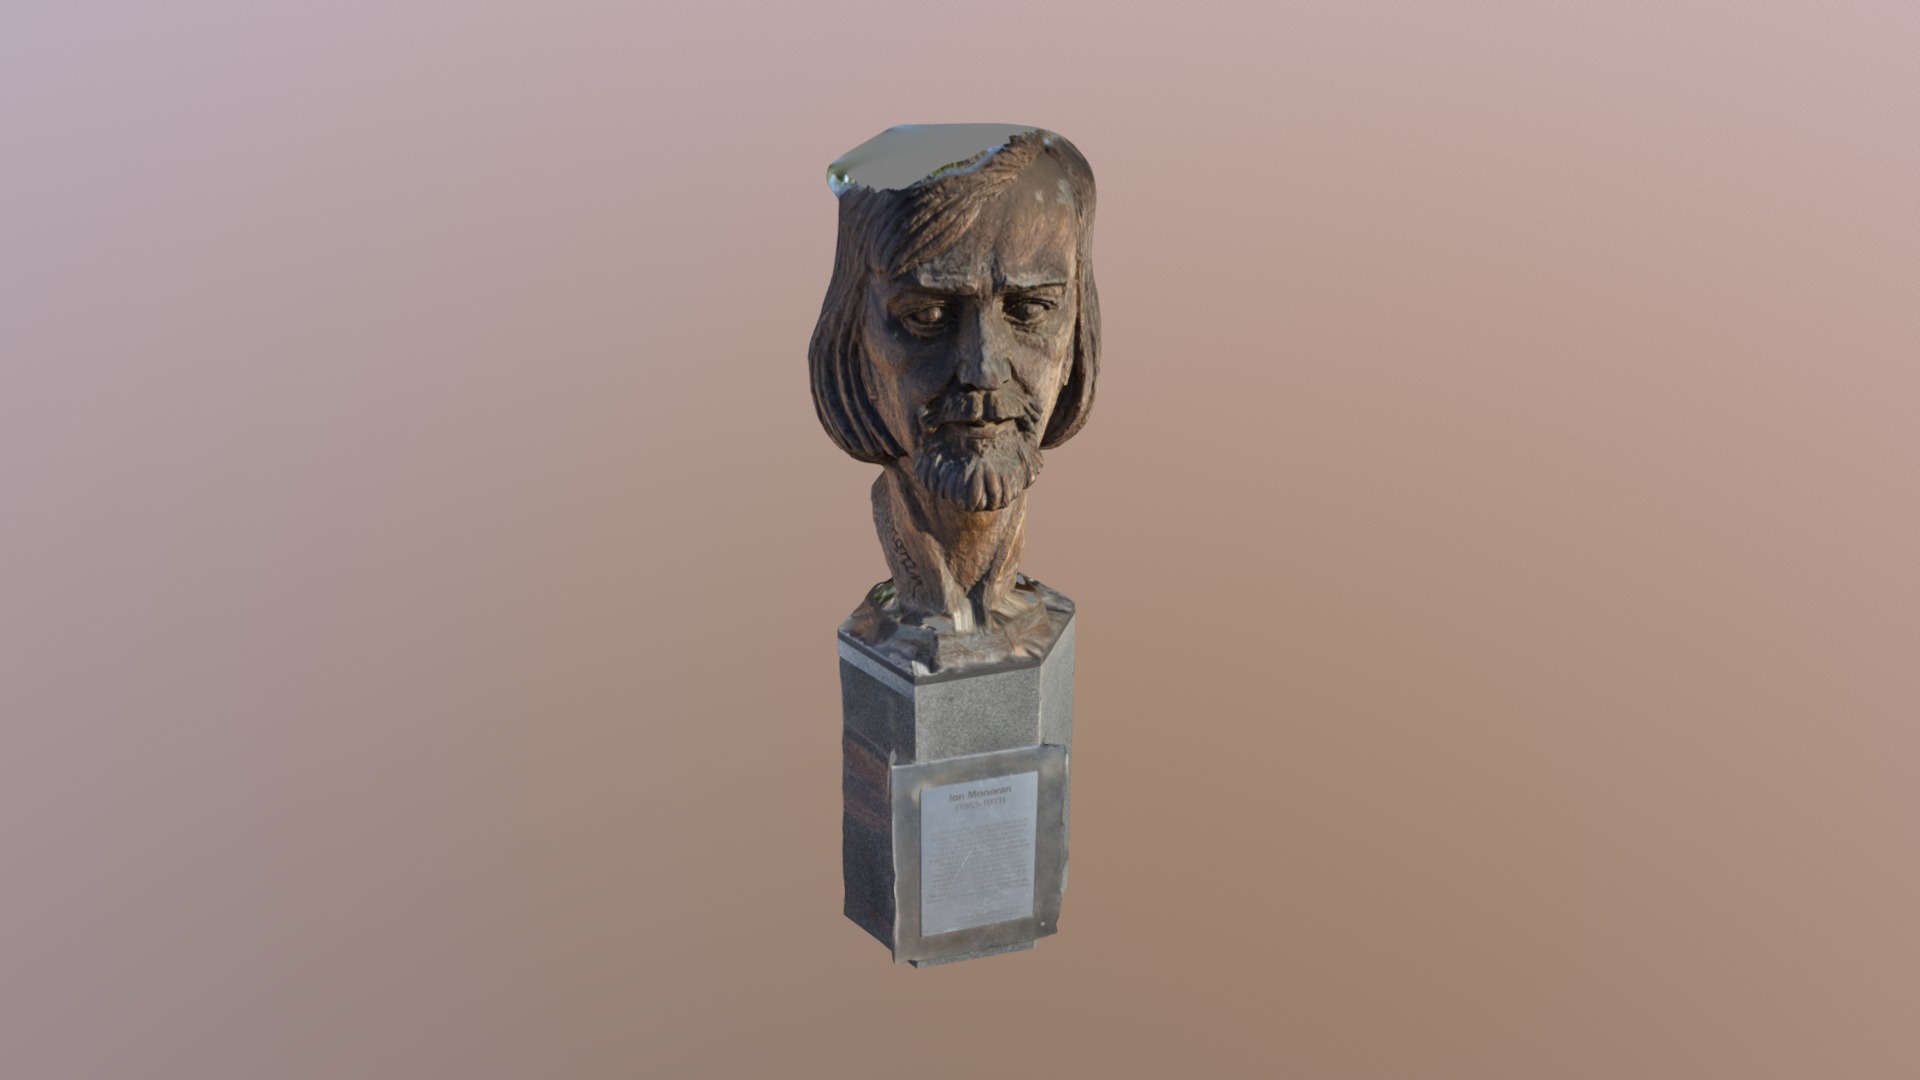 3D model Ion Monoran - This is a 3D model of the Ion Monoran. The 3D model is about a statue of a person.